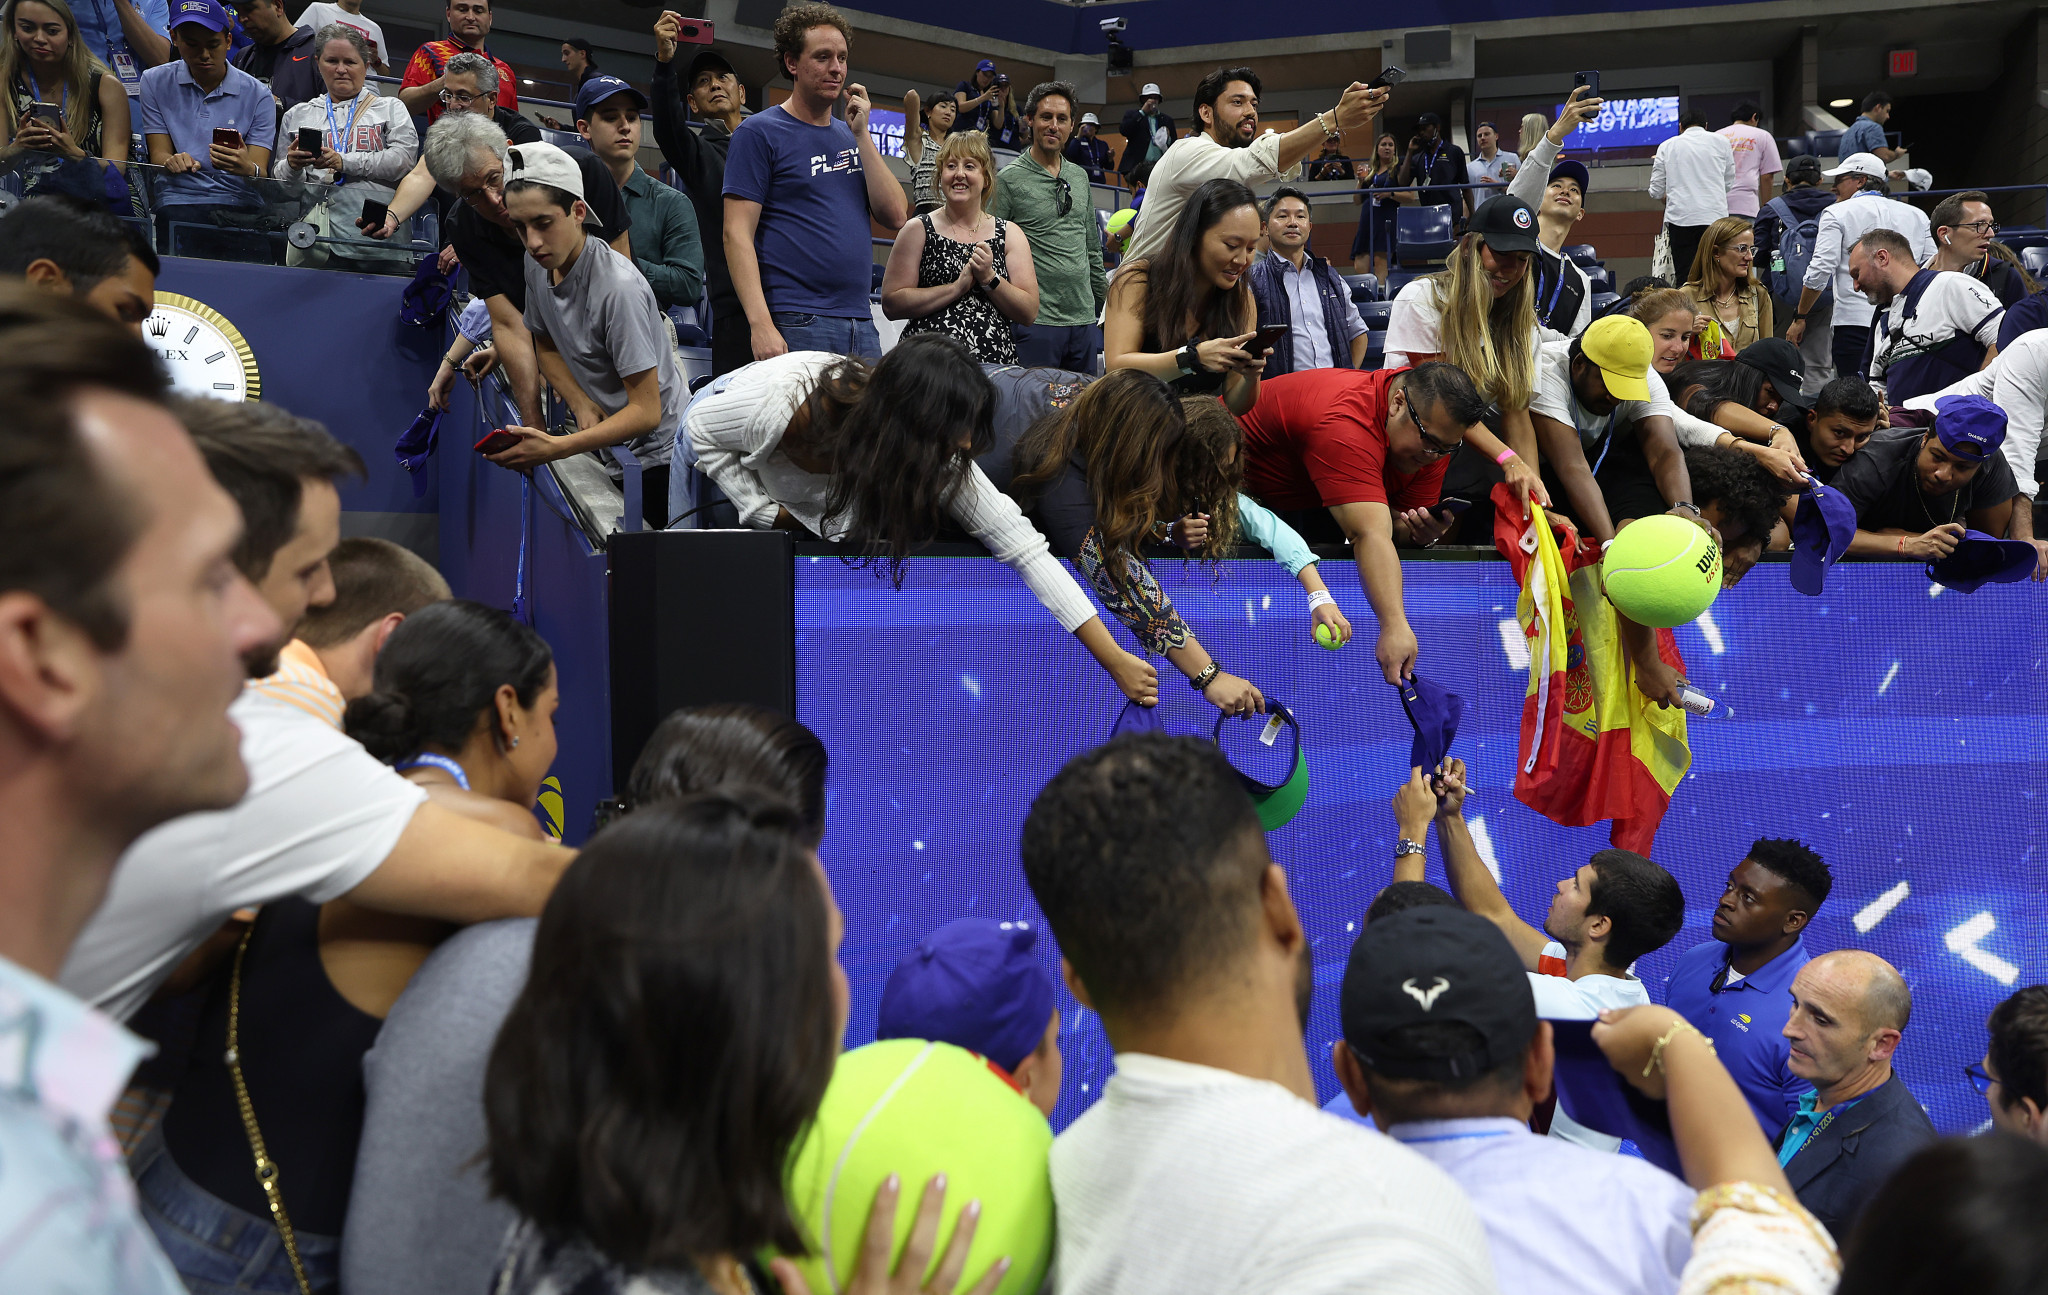 Fans queue for Alcaraz's signature in the aftermath of the men's singles final ©Getty Images